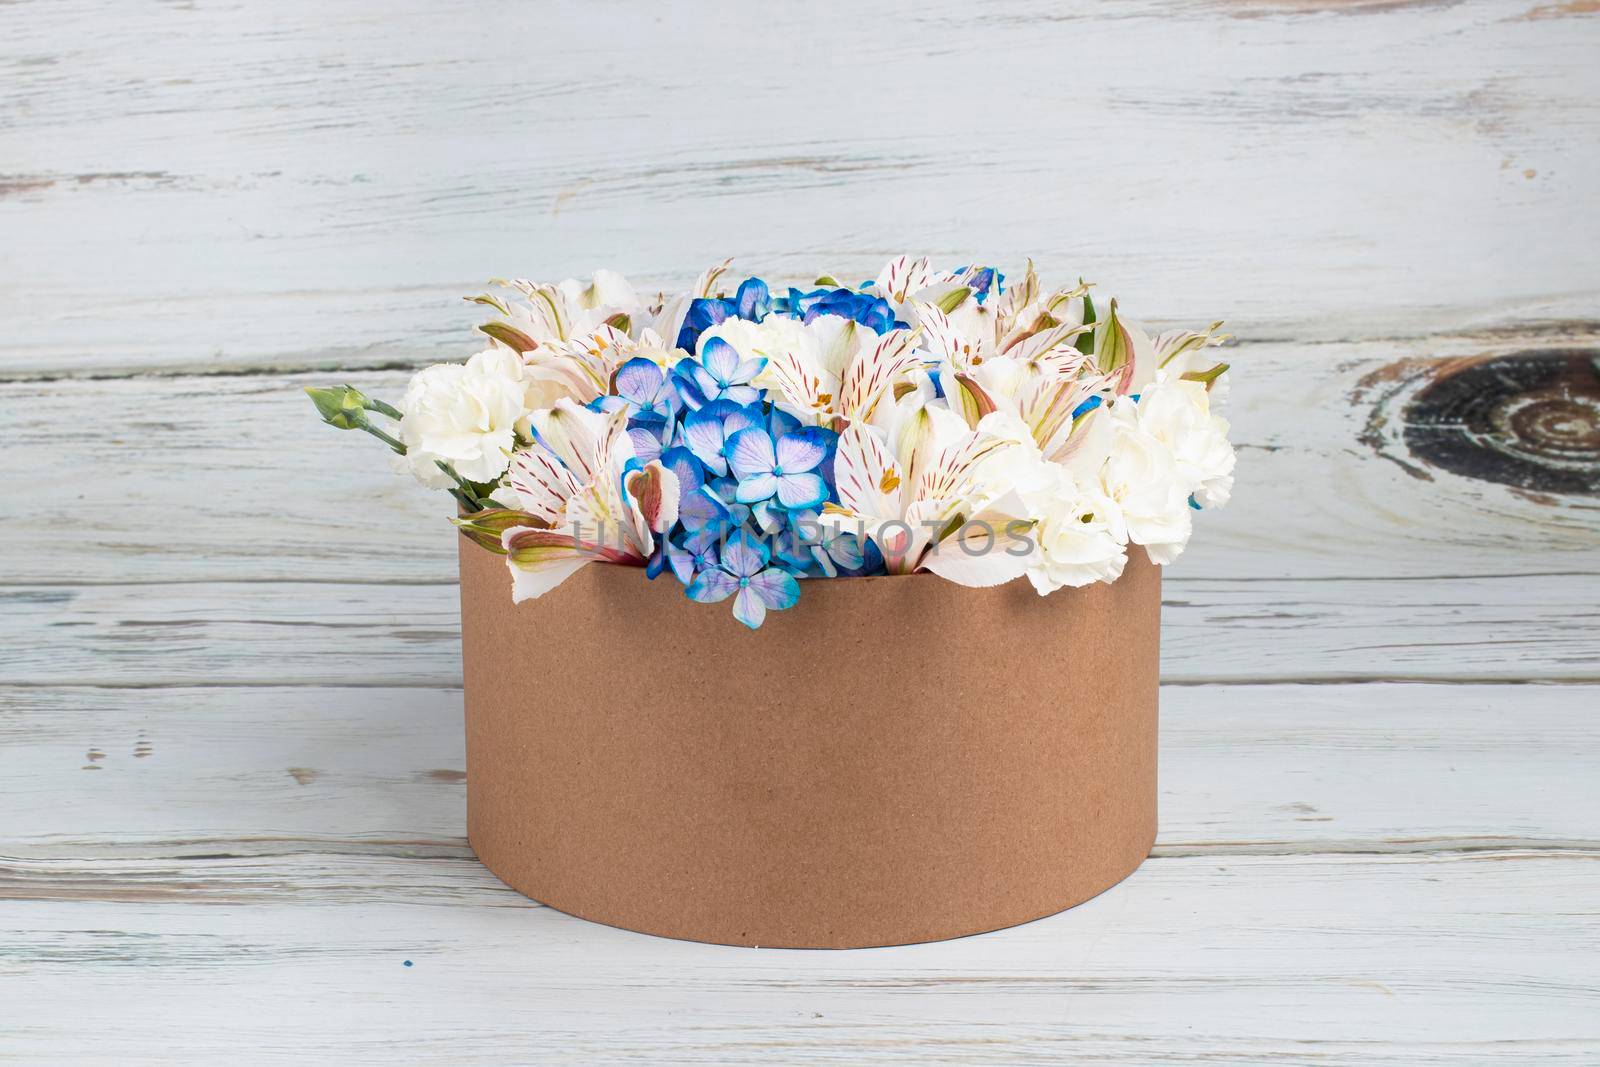 Floral arrangement with blue hydrangeas in recyclable cardboard box